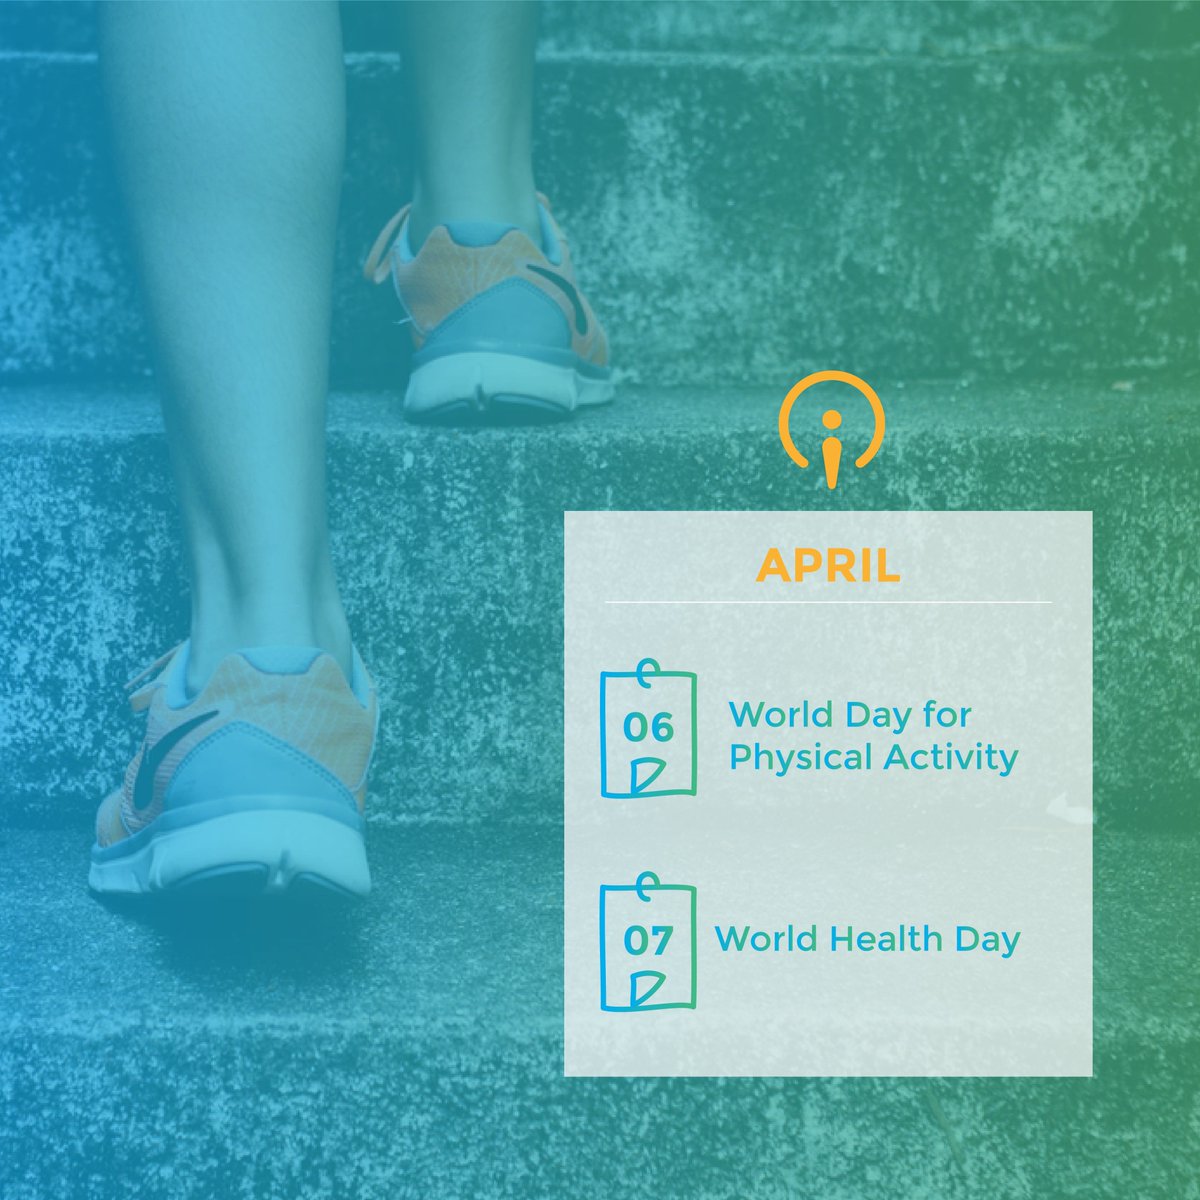 A two-day journey of physical exercise, health and #ENERGYEFFICIENCY… starts right now!

At work or at your apartment, prefer to go up and down stairs instead of using the elevator.  💪

#GReSBAS #WorldDayForPhysicalActivity #WorldHealthDay2018